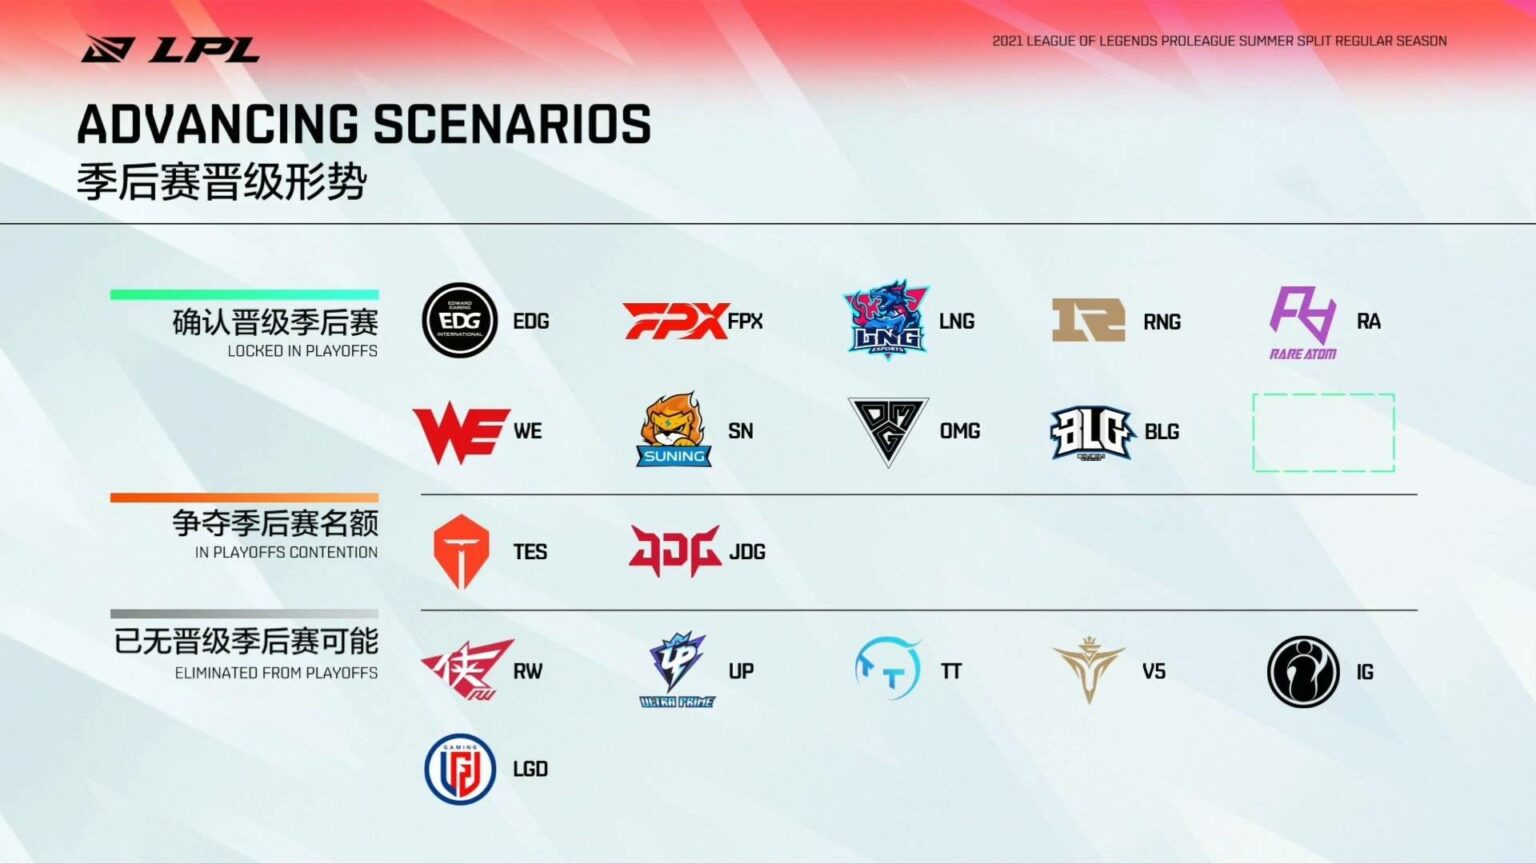 Every team qualified for the 2021 LPL Summer playoffs ONE Esports